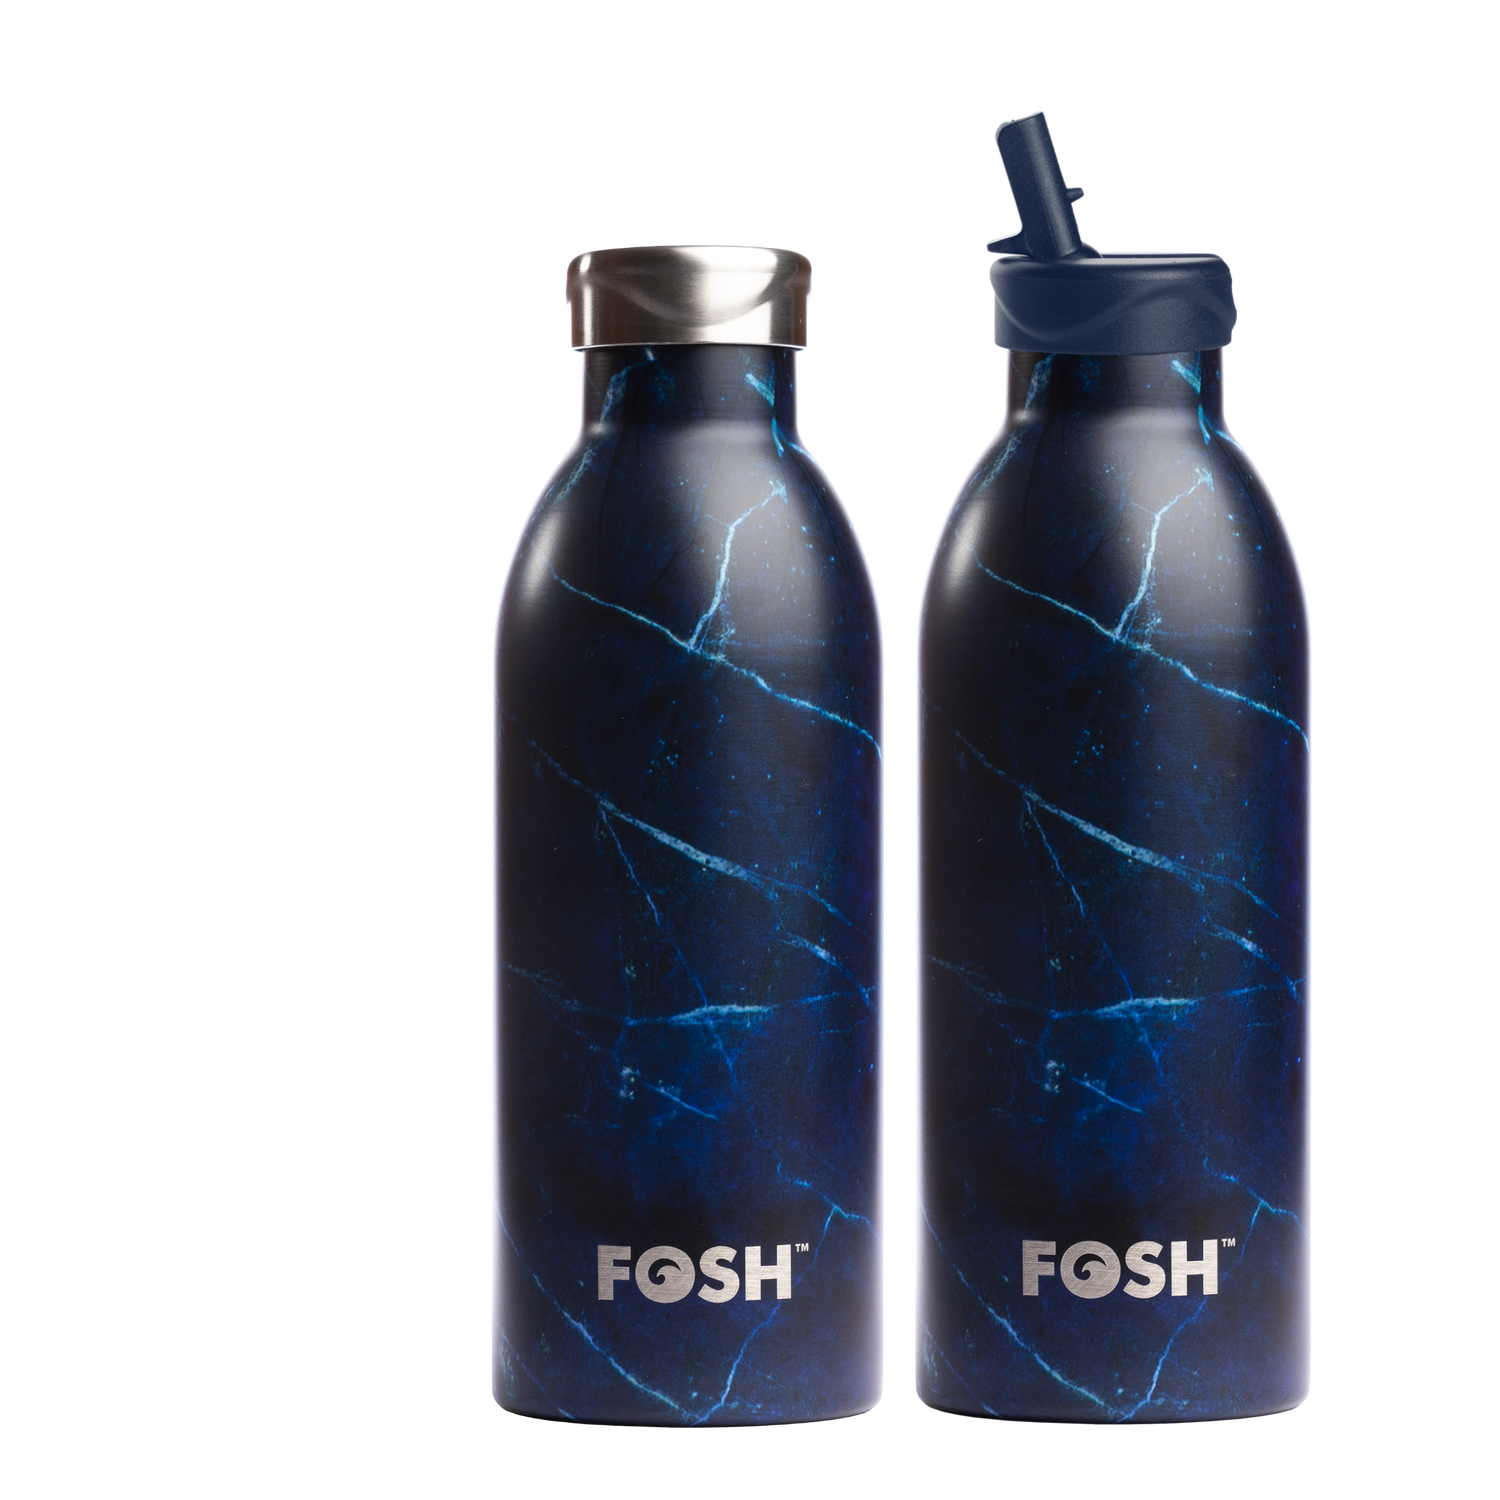 Orca Water Bottle - Standard Mouth Stainless Steel & Vacuum Insulated Bottle